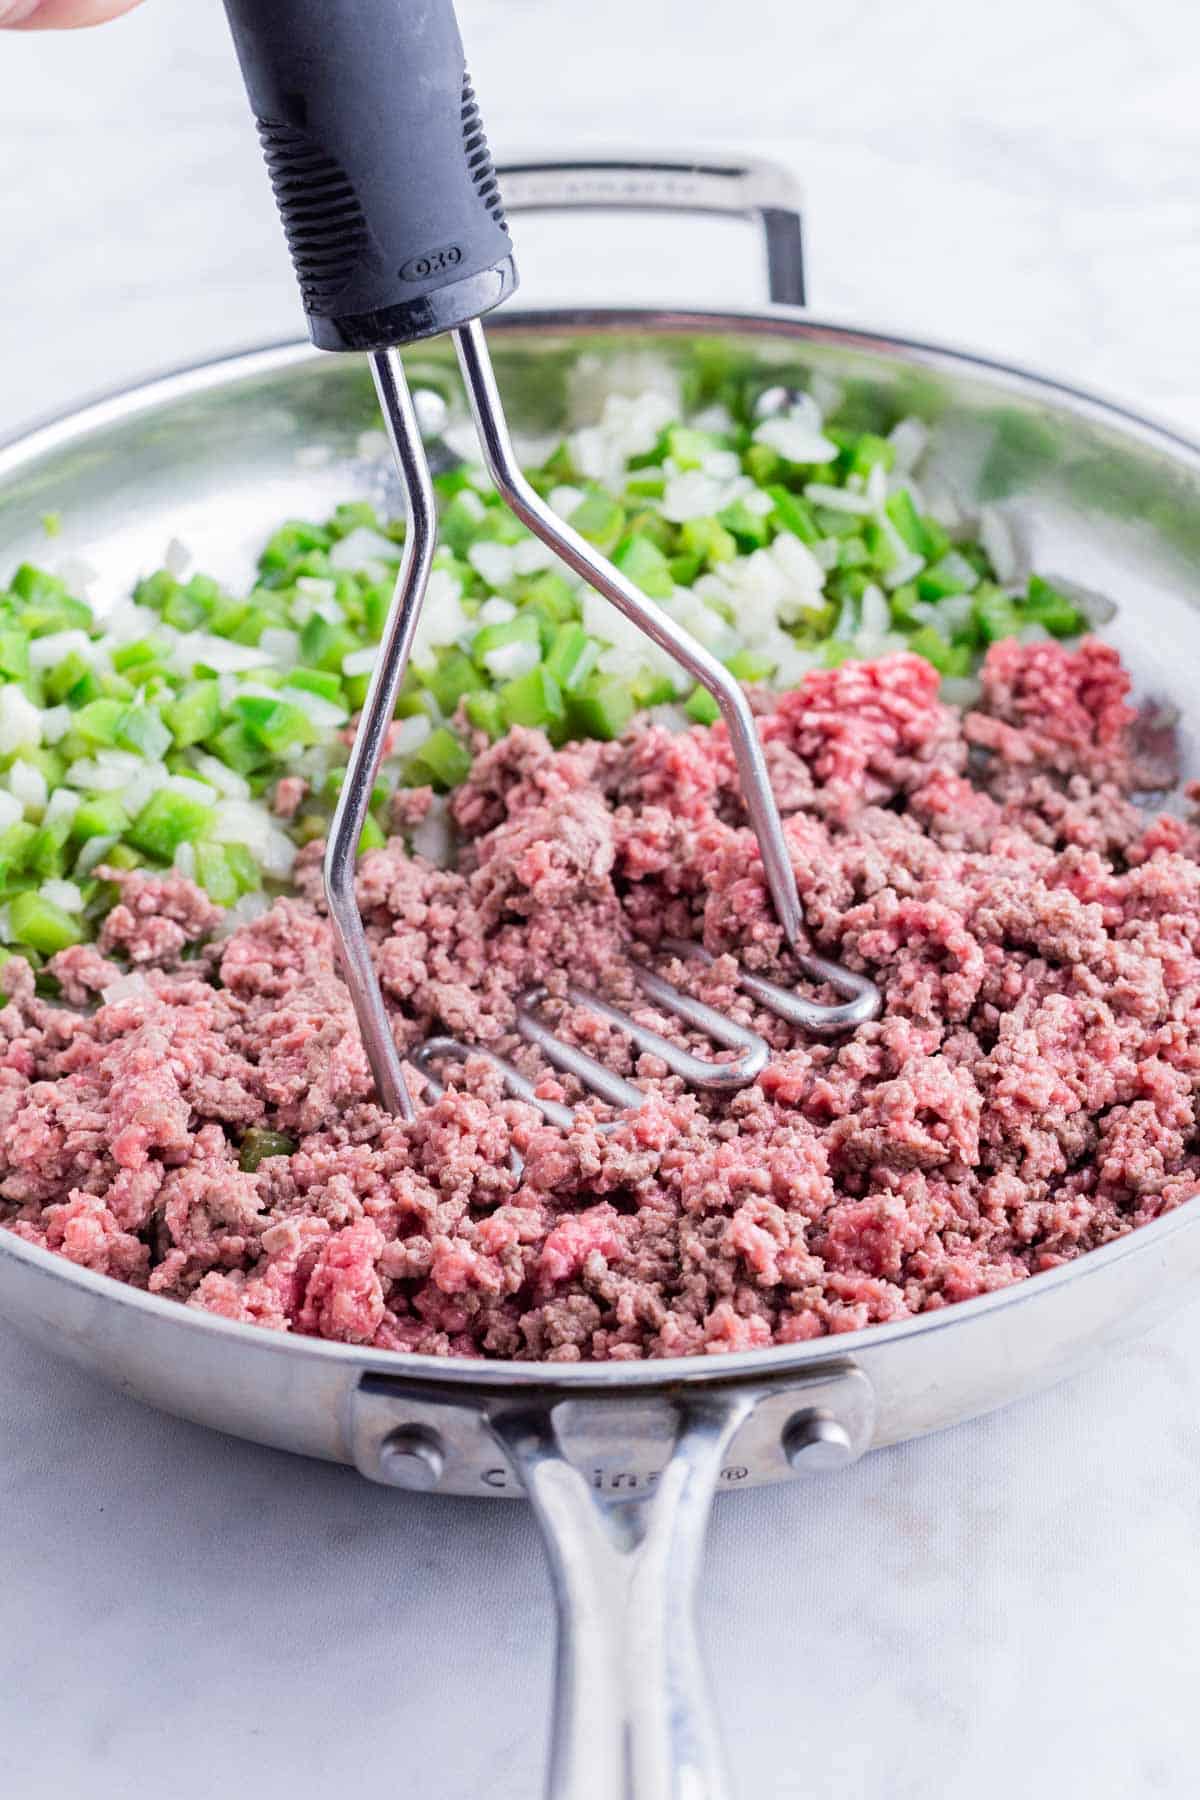 A potato masher breaks up ground beef in a skillet with veggies.